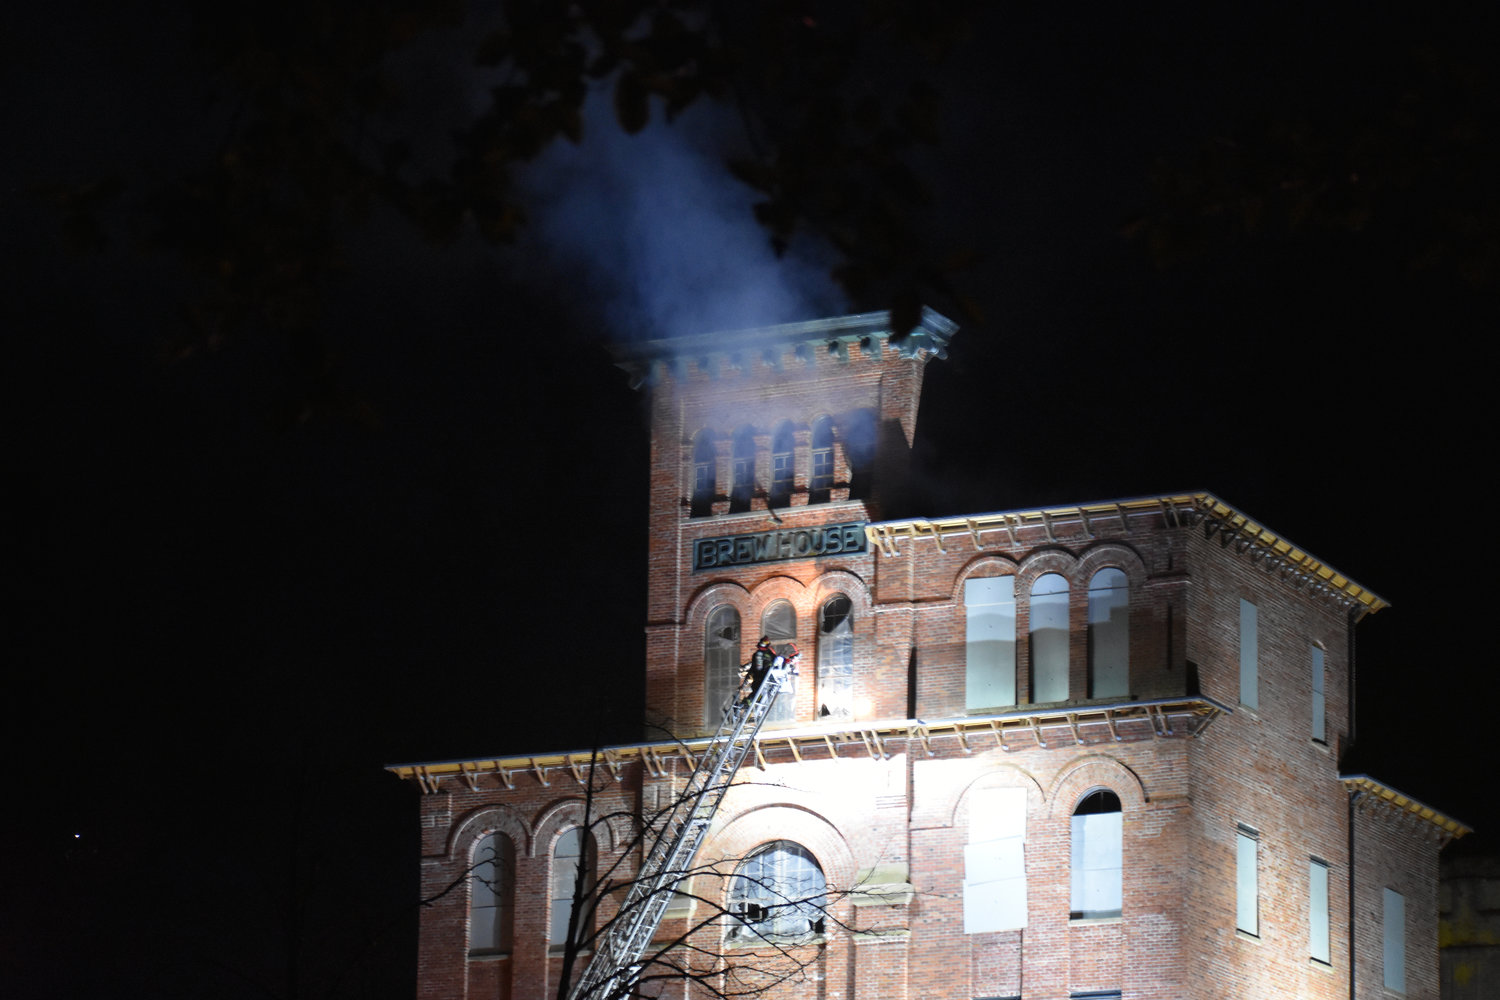 The Tumwater Fire Department put out a fire at the Old Brewery Tower on Saturday night. Officials determined the fire was the result of arson.